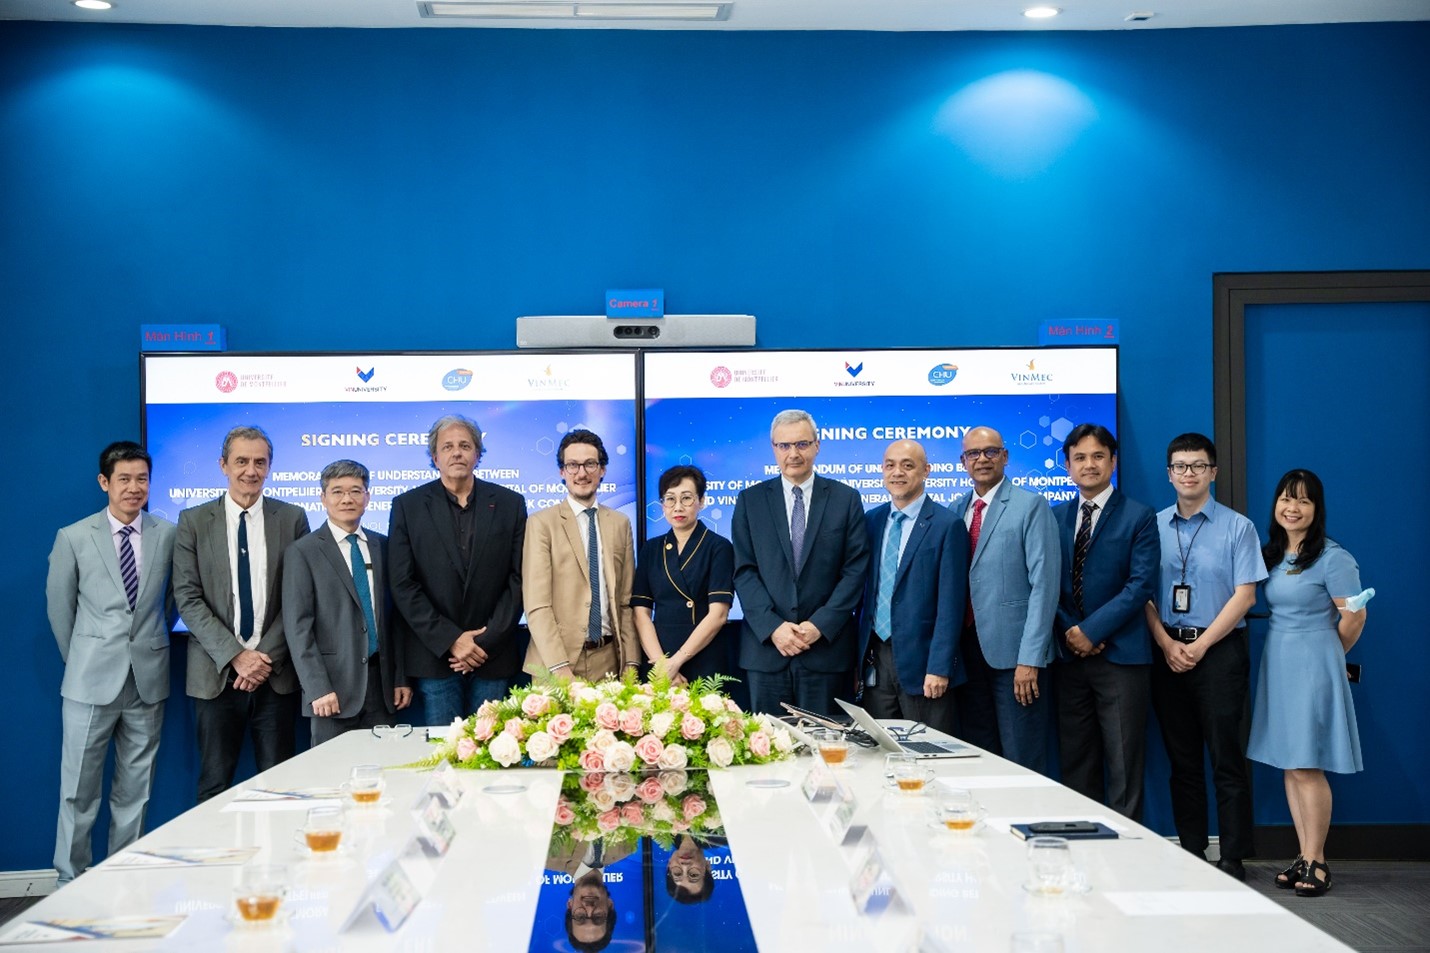 VinUniversity to partner with University of Montpellier, University Hospital of Montpellier, and Vinmec to boost global reputation and foster academic cooperation